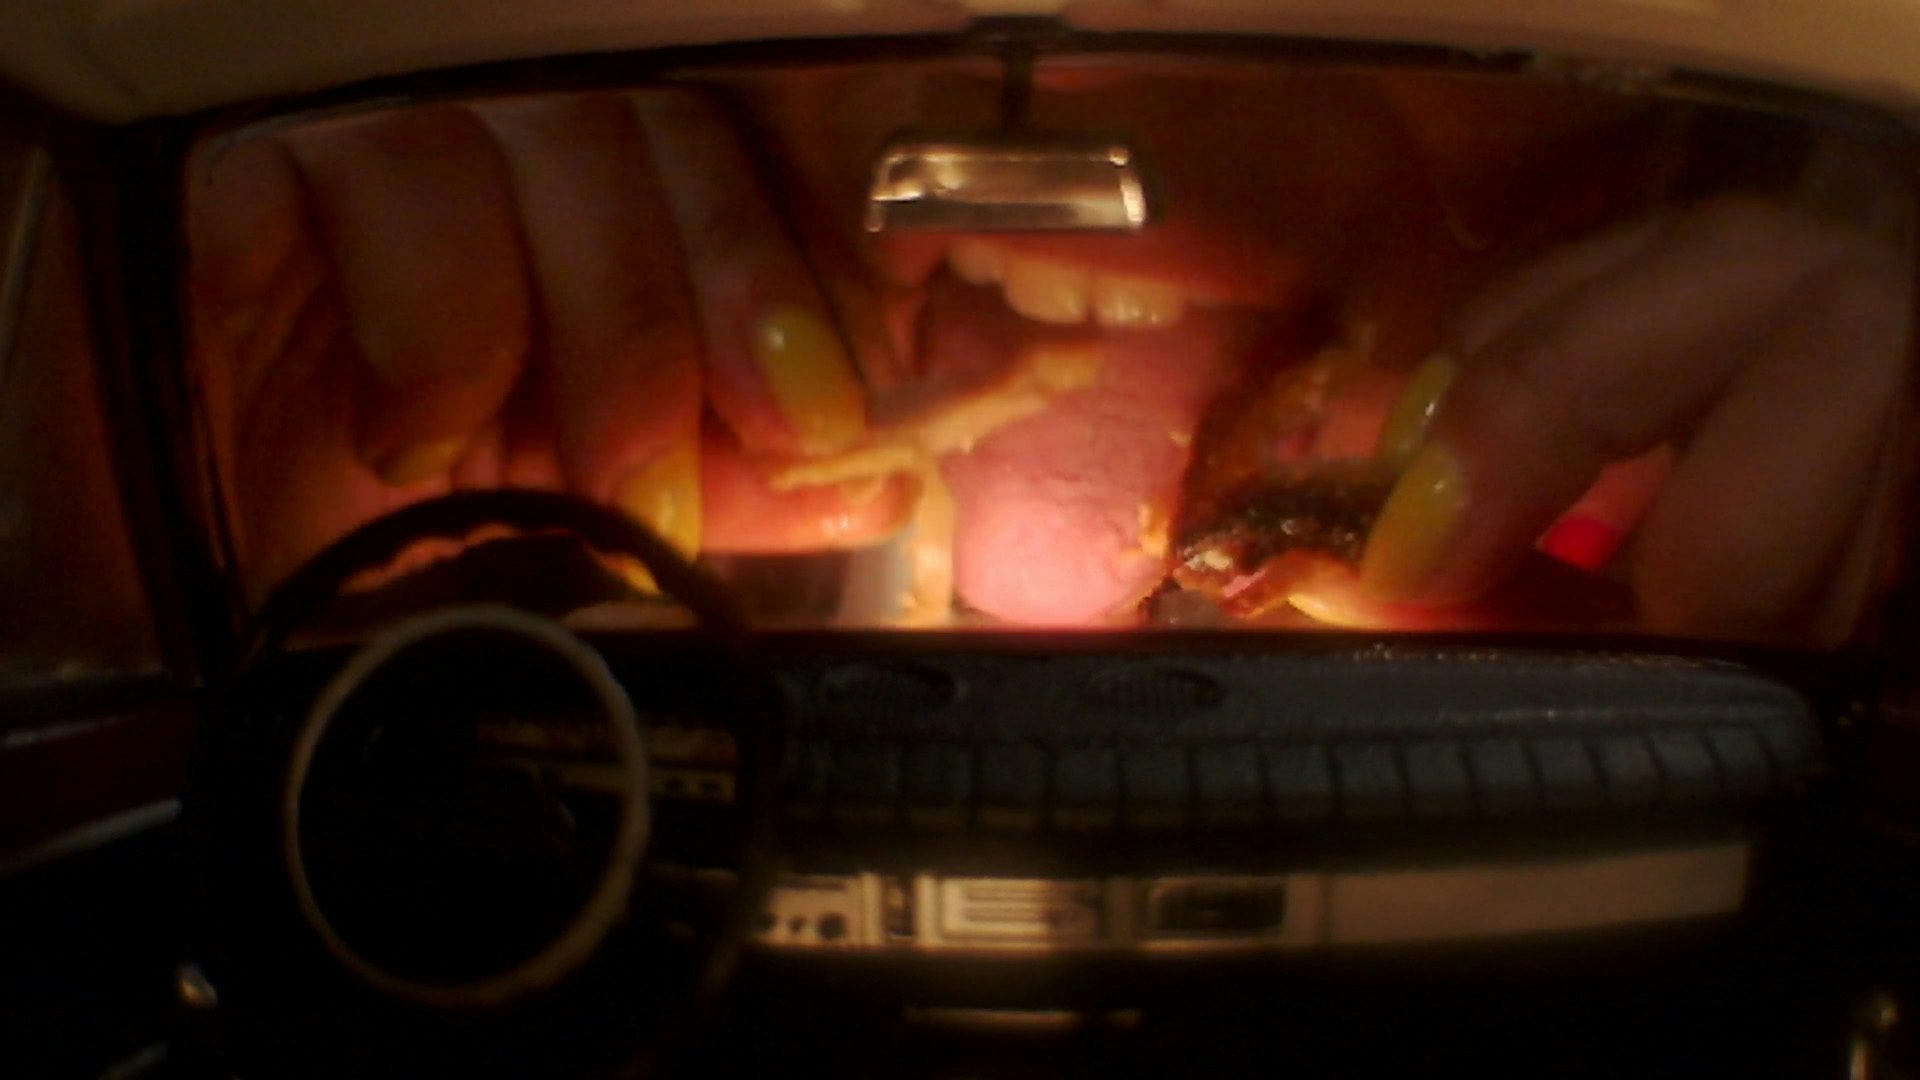 Still from Oscar Hudson's music video for Big Hammer by James Blake showing a large mouth appearing to lick food as seen through a car windscreen